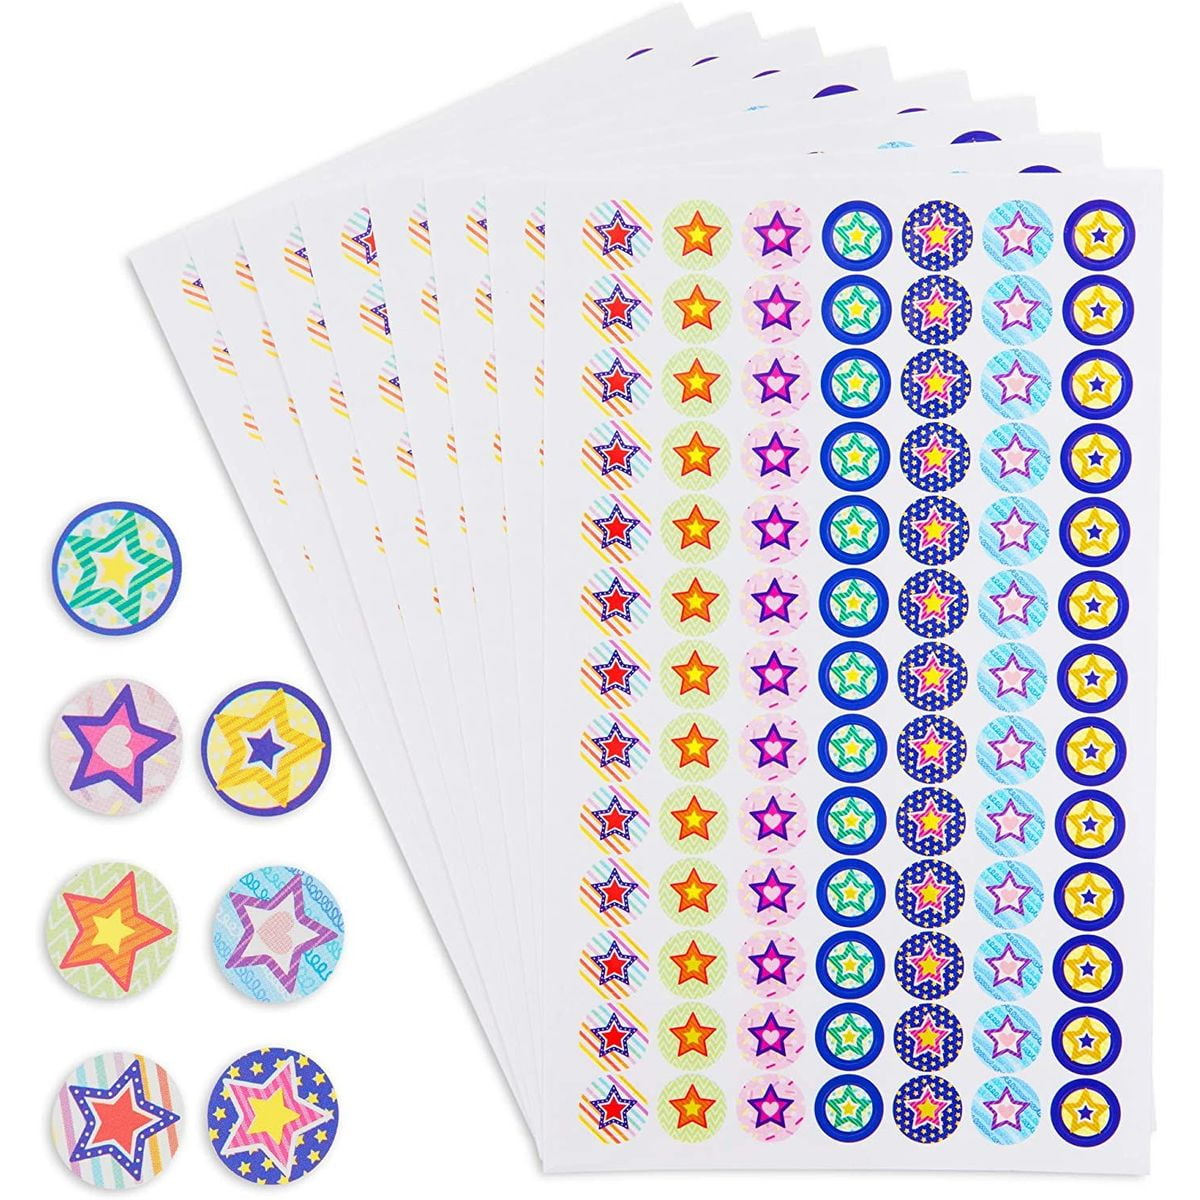 2730 Count Teacher Star Reward Stickers for kids and Students